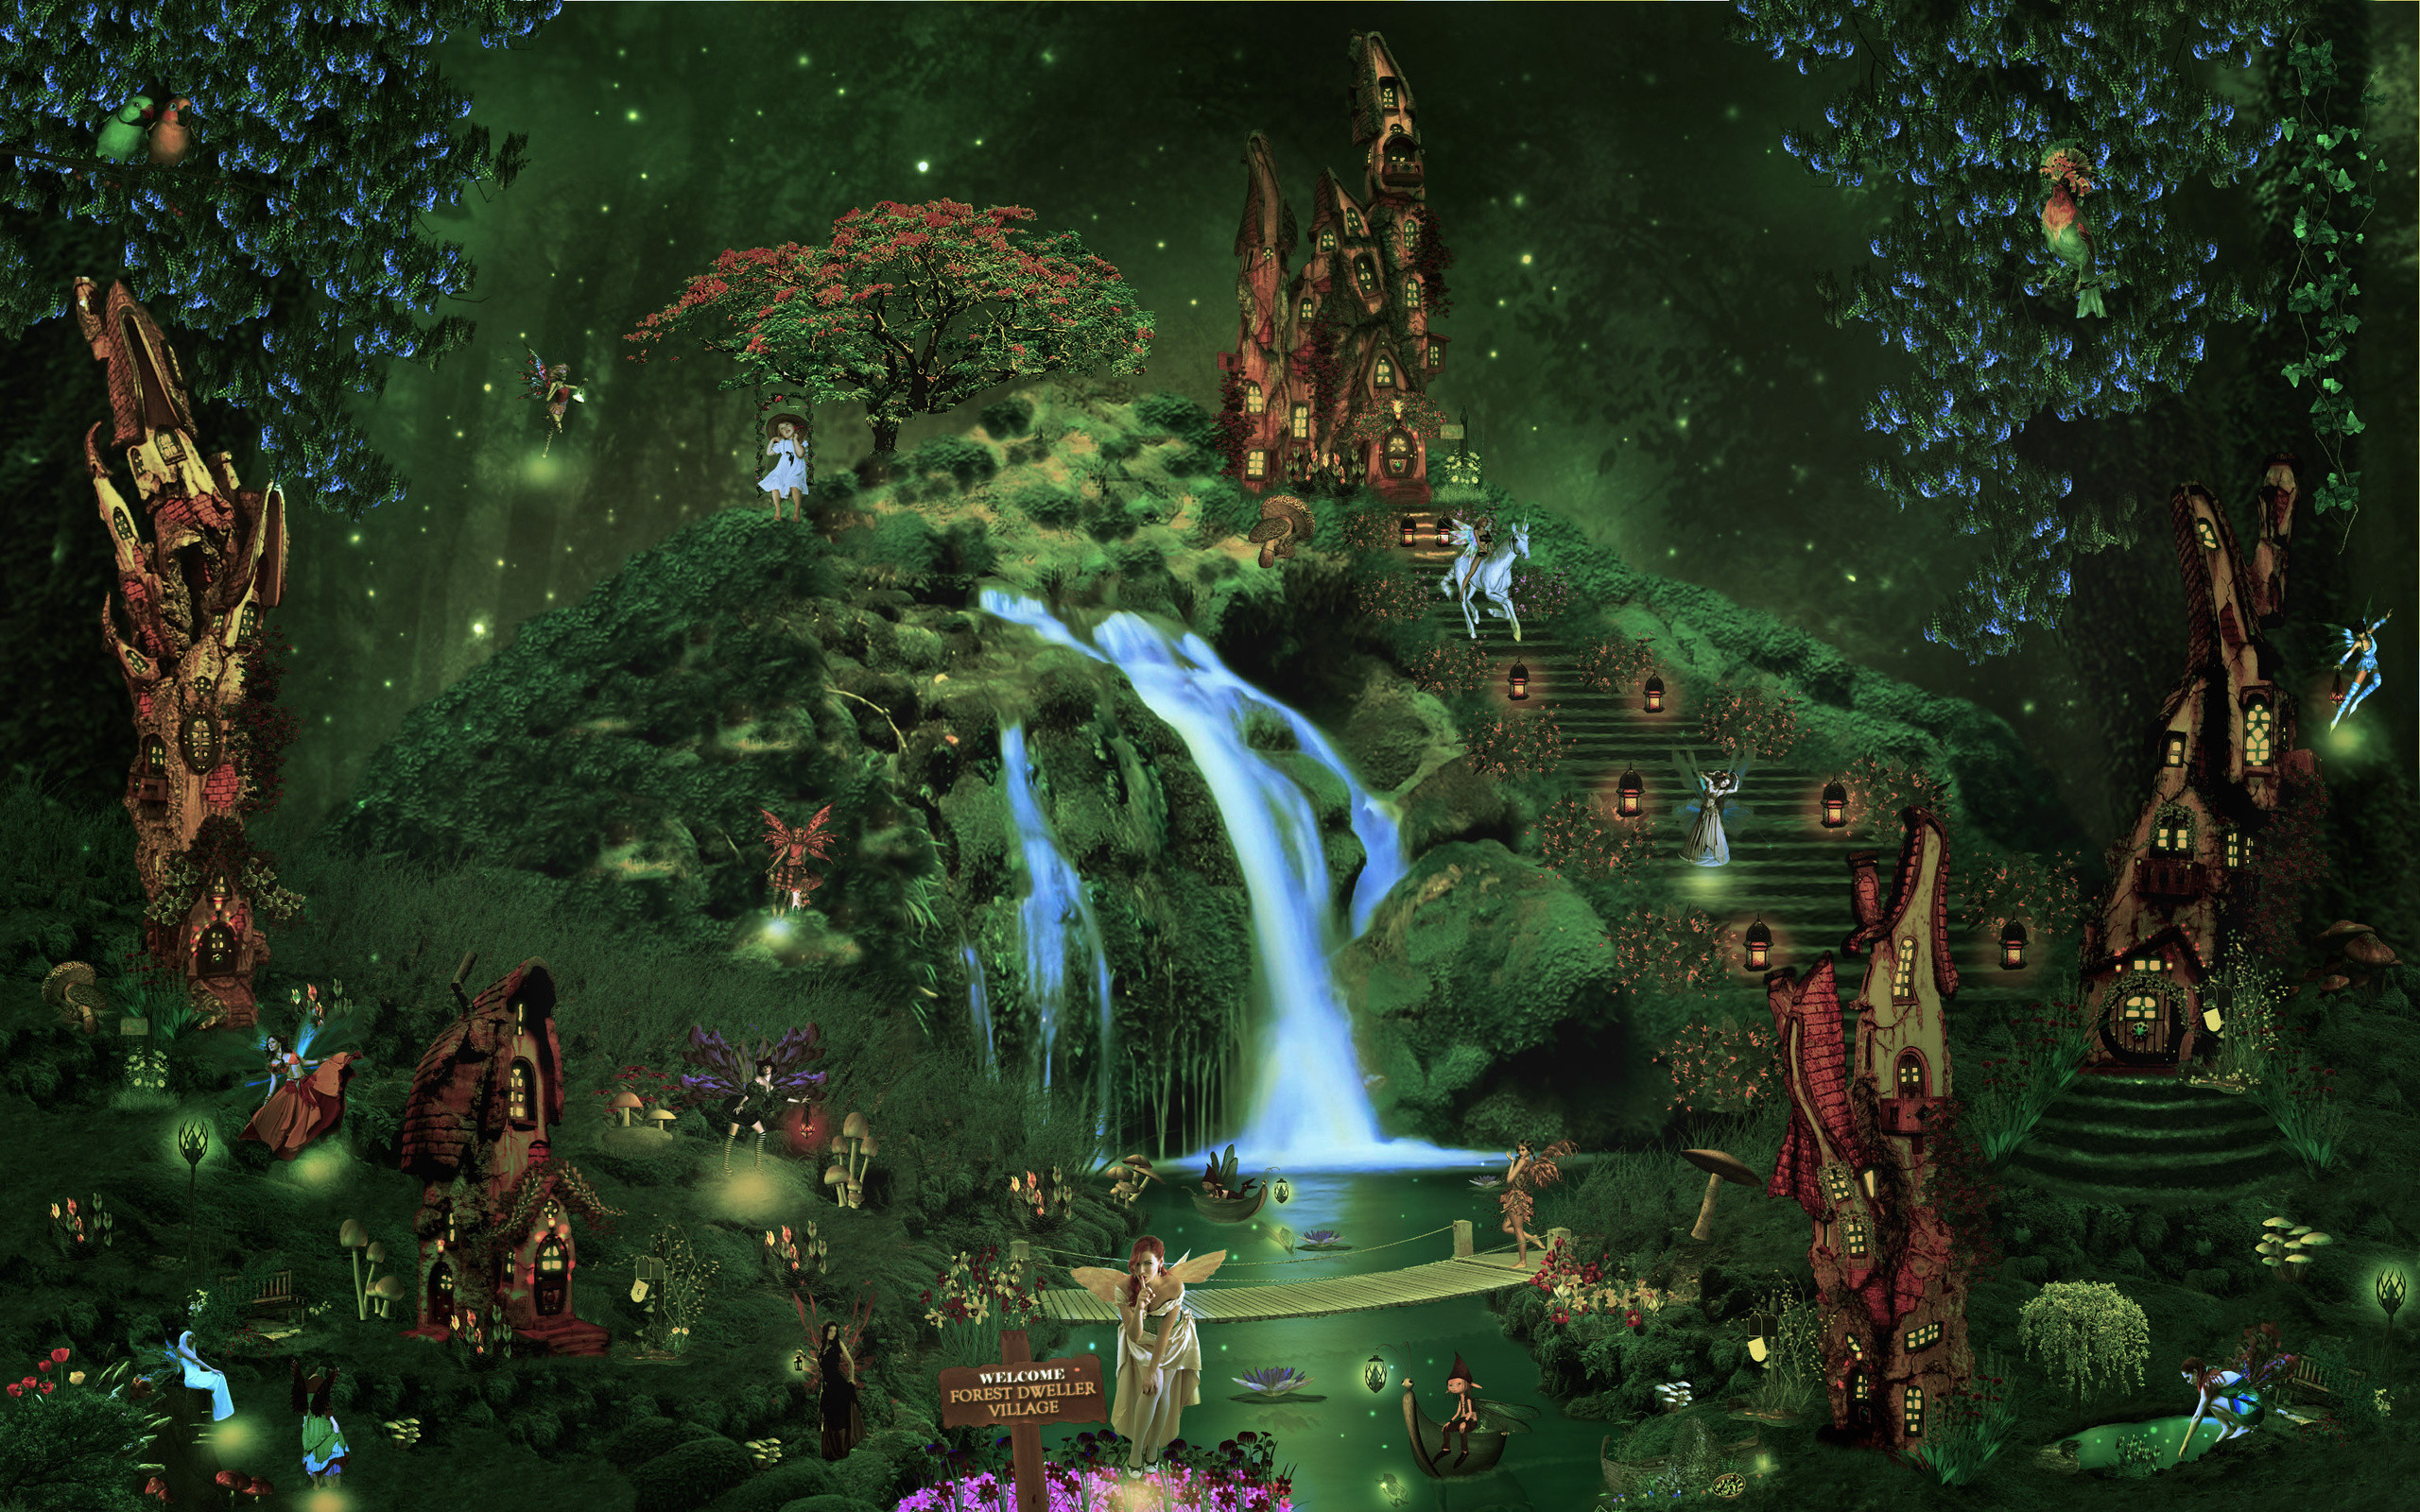 2560x1600 Enchanted forest Stock Best High Quality